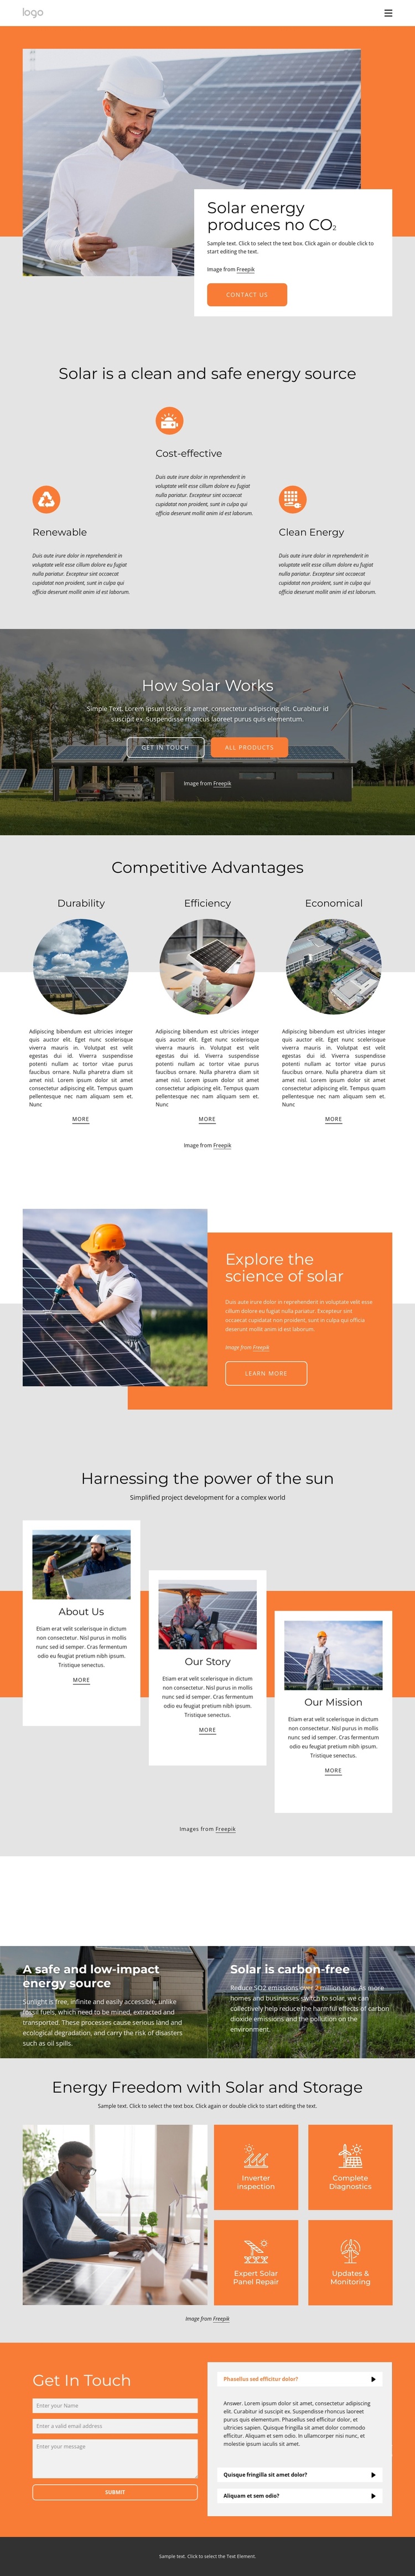 Power your home with clean solar energy Joomla Template